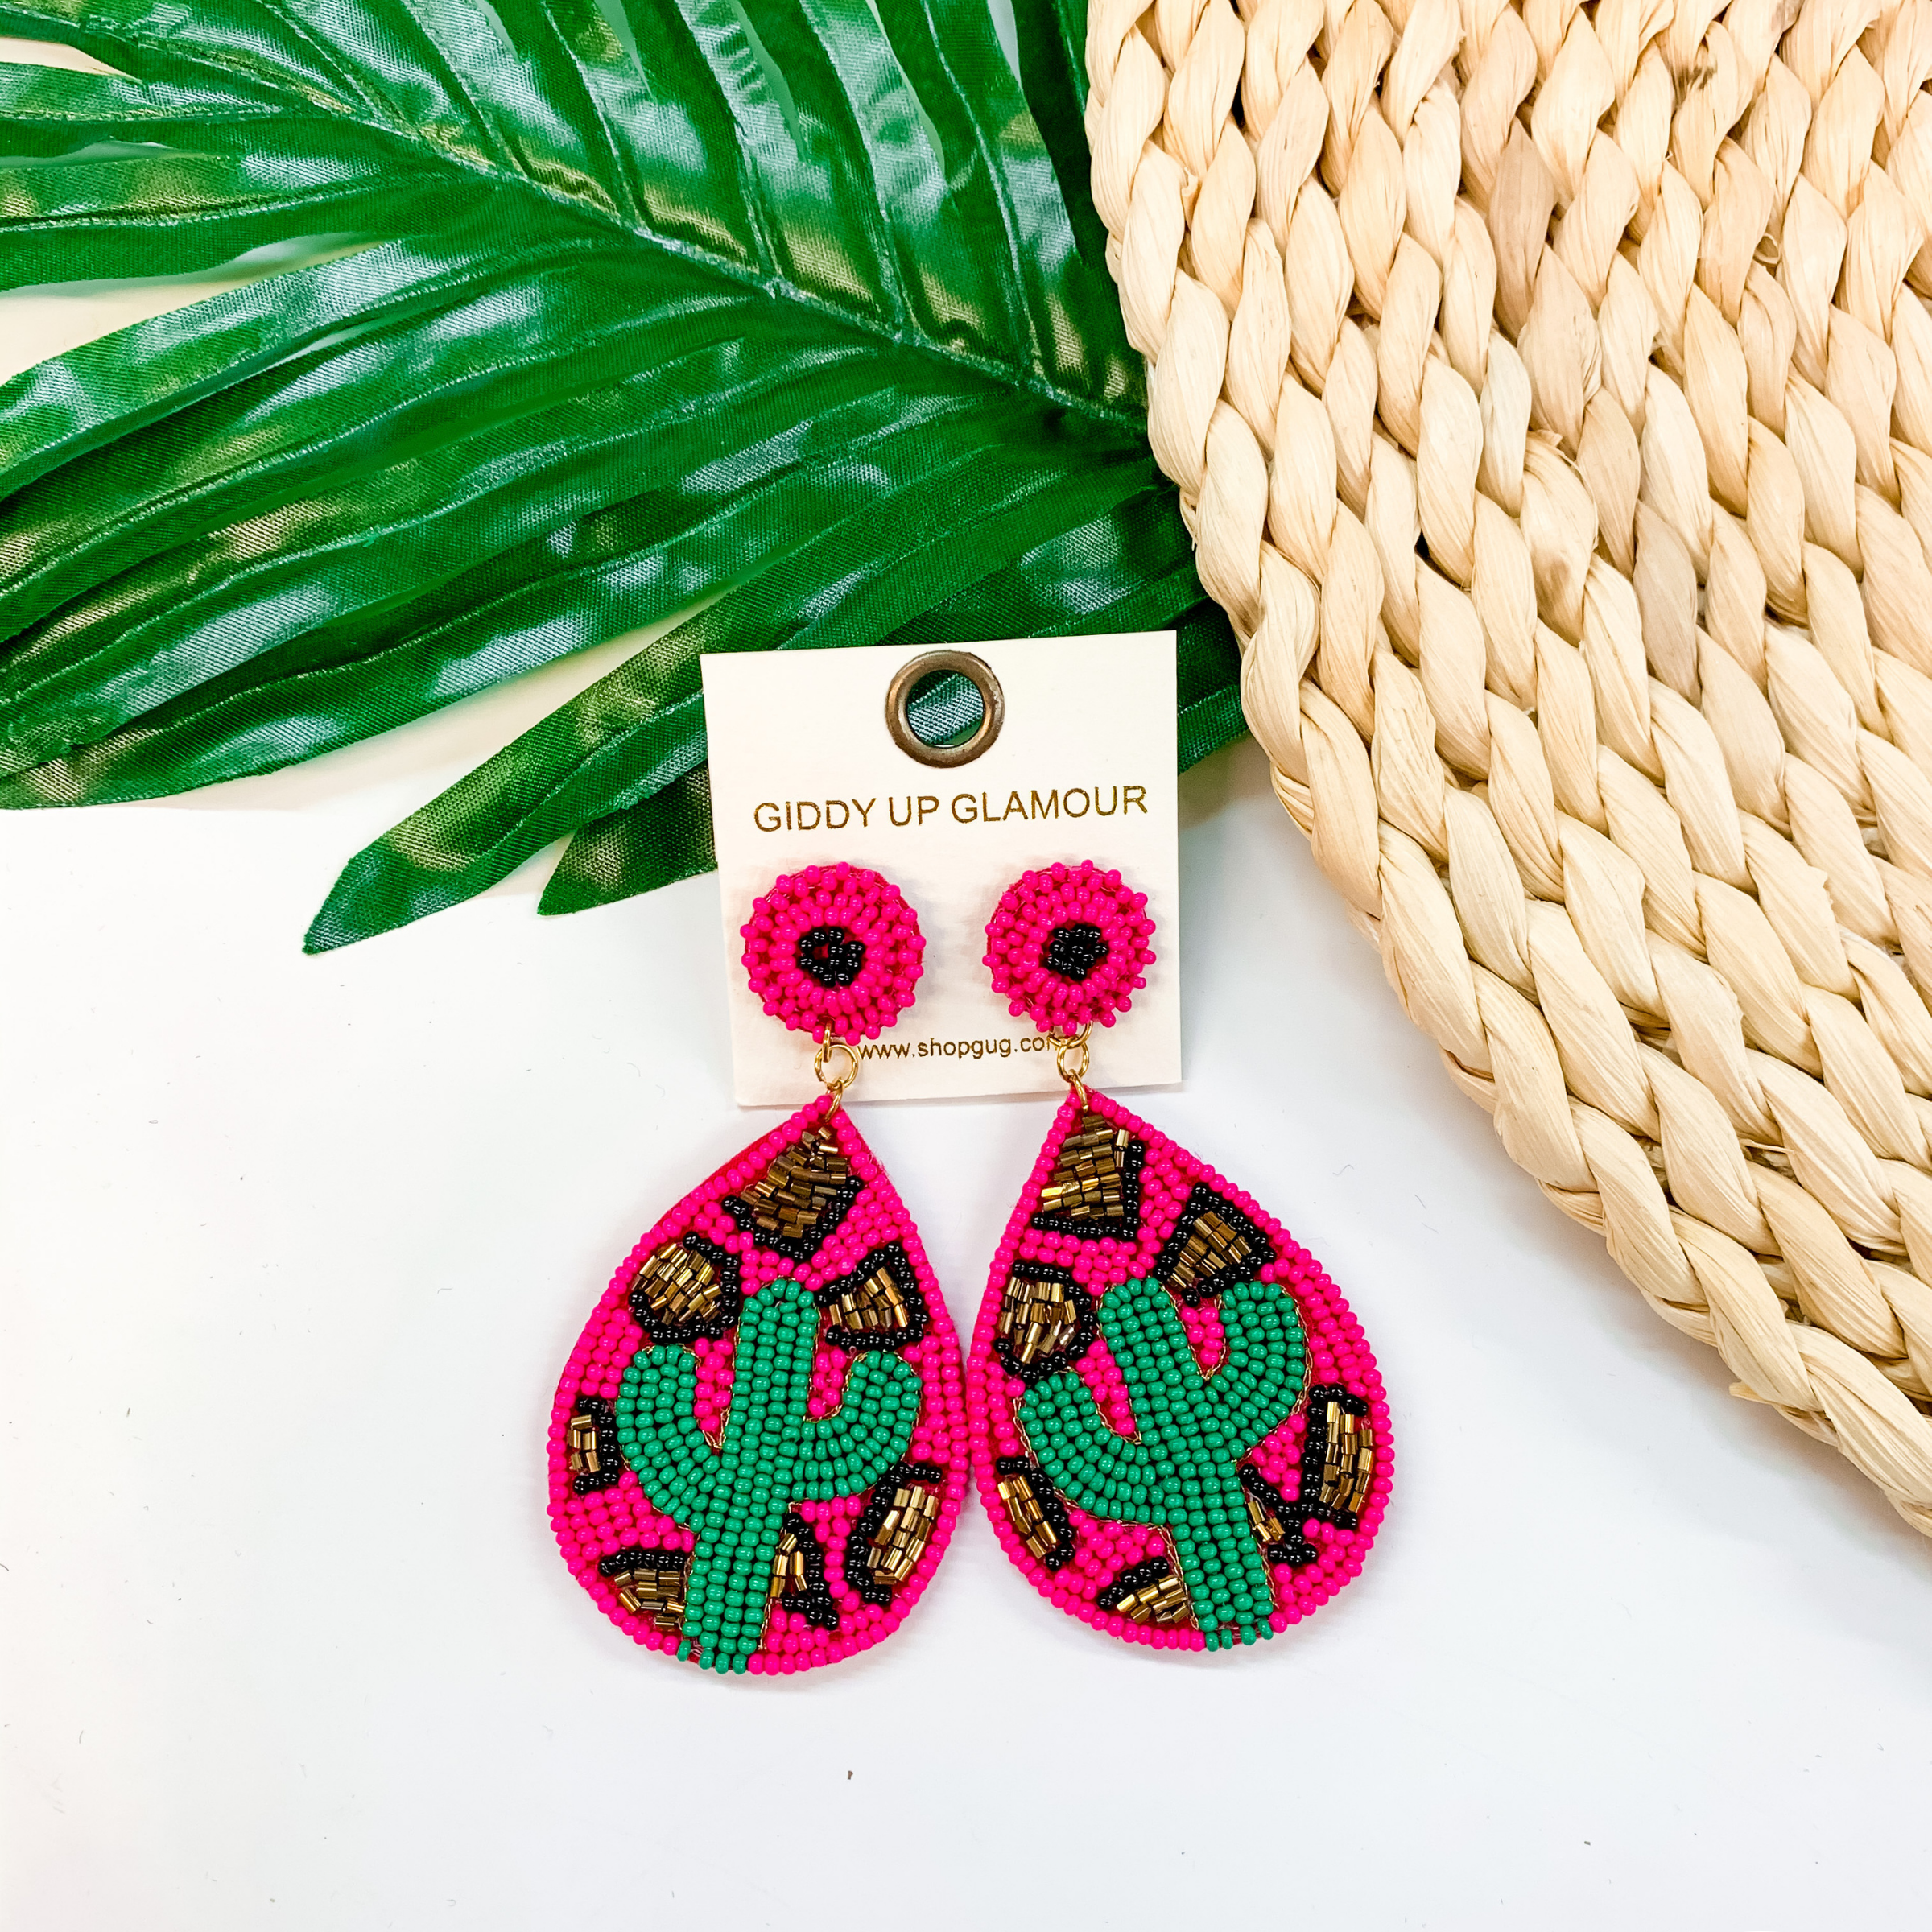 Cactus and Leopard Print Seed Bead Teardrop Earrings In Fuchsia and Green - Giddy Up Glamour Boutique